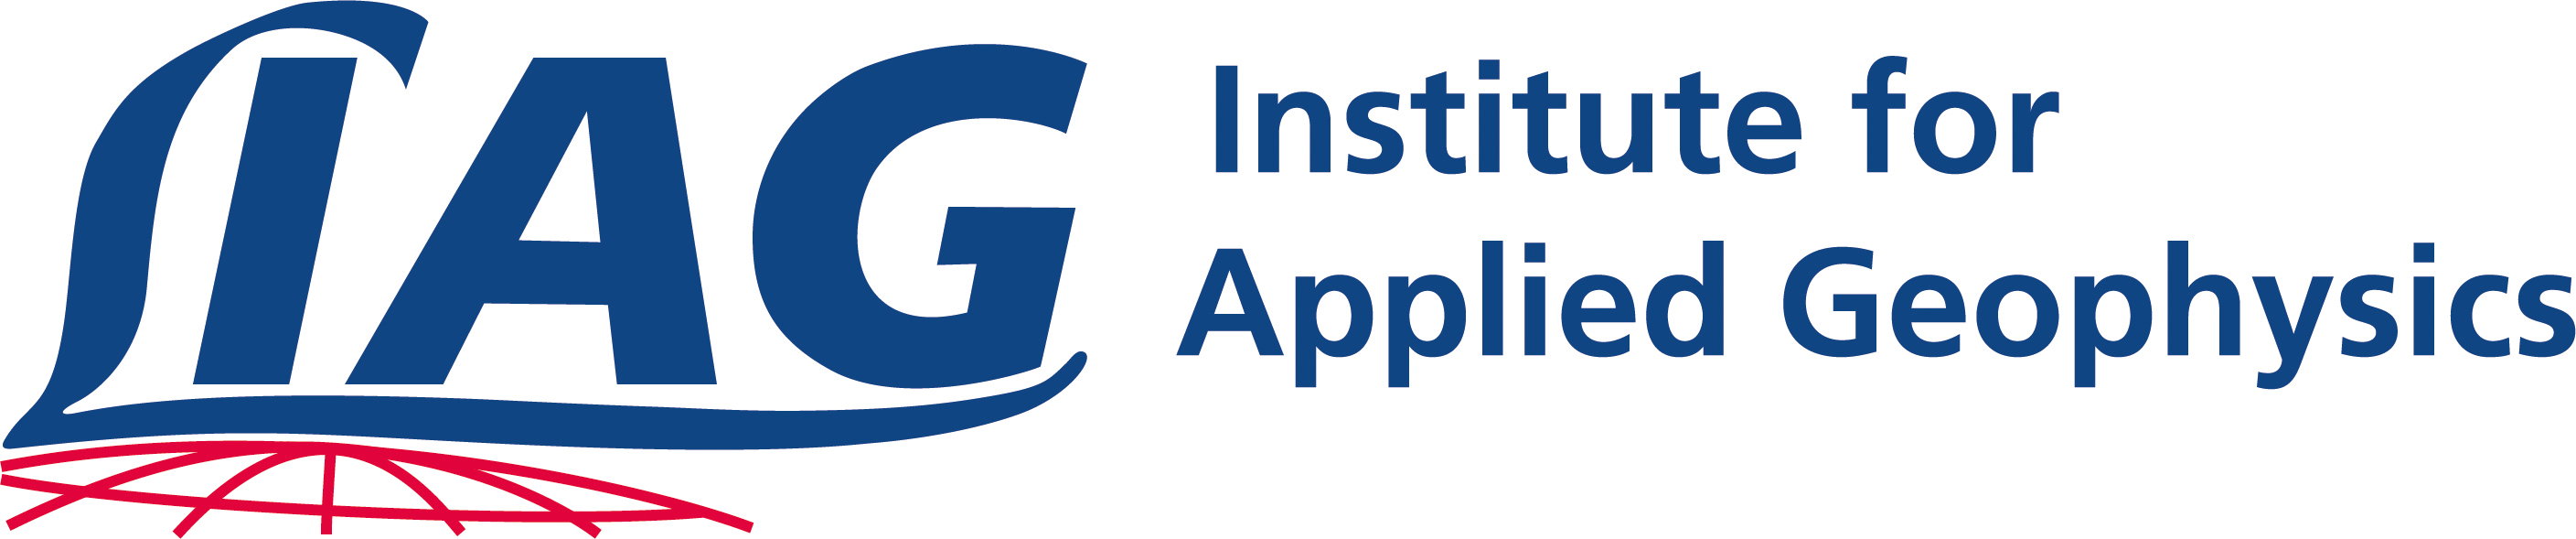 LIAG Institute for Applied Geophysics